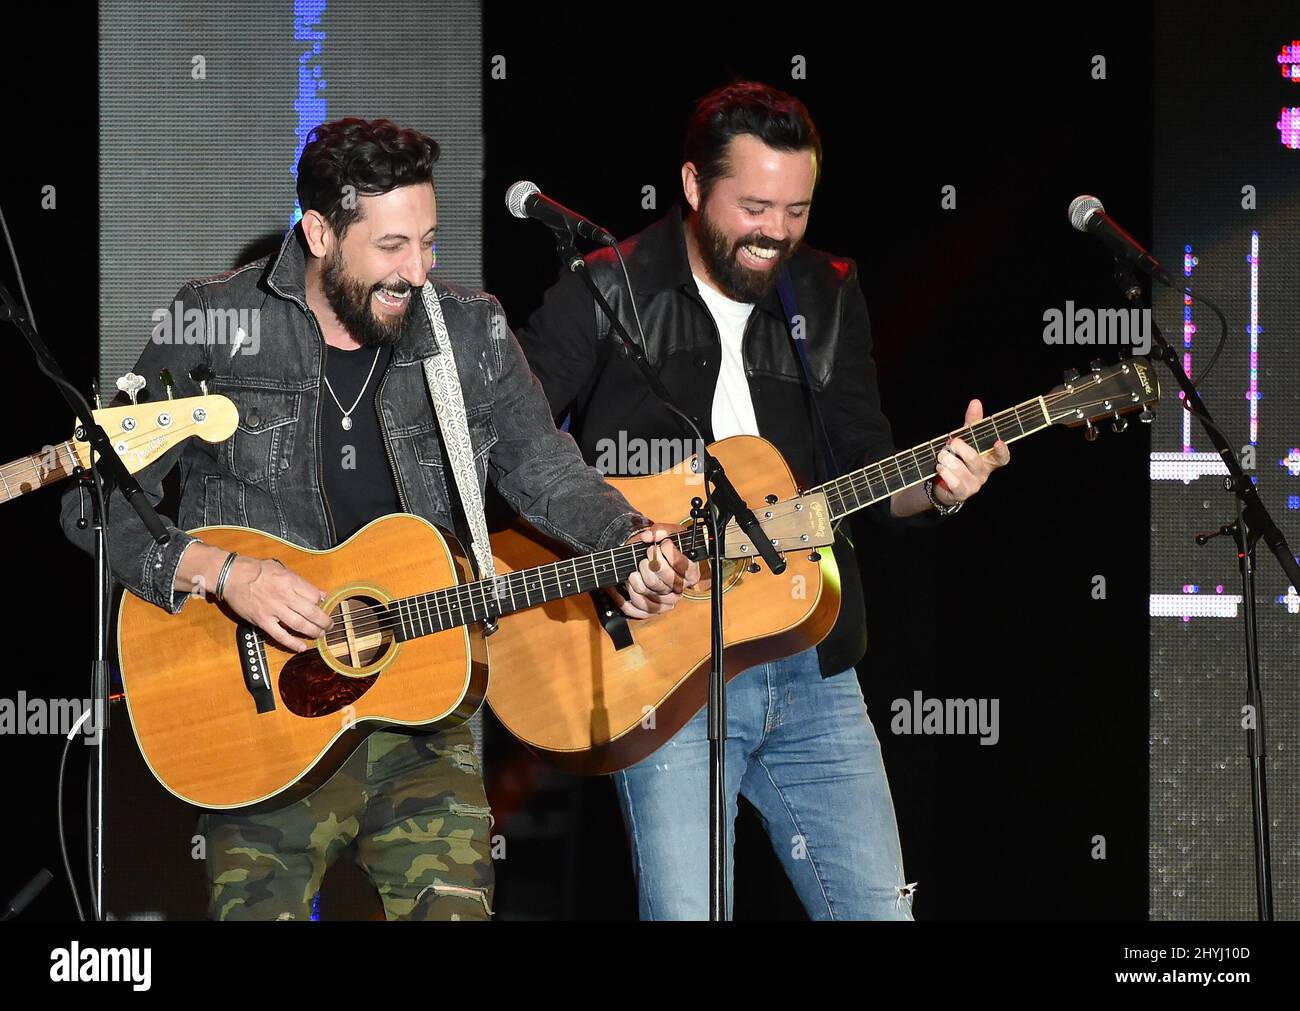 Old Dominion's Matthew Ramsey and Brad Tursi performing at the 7th ACM Party For a Cause - ACM Stories, Songs & Stars at Marquee Ballroom at MGM Grand Hotel & Casino on April 05, 2019 in Las Vegas, NV. Stock Photo